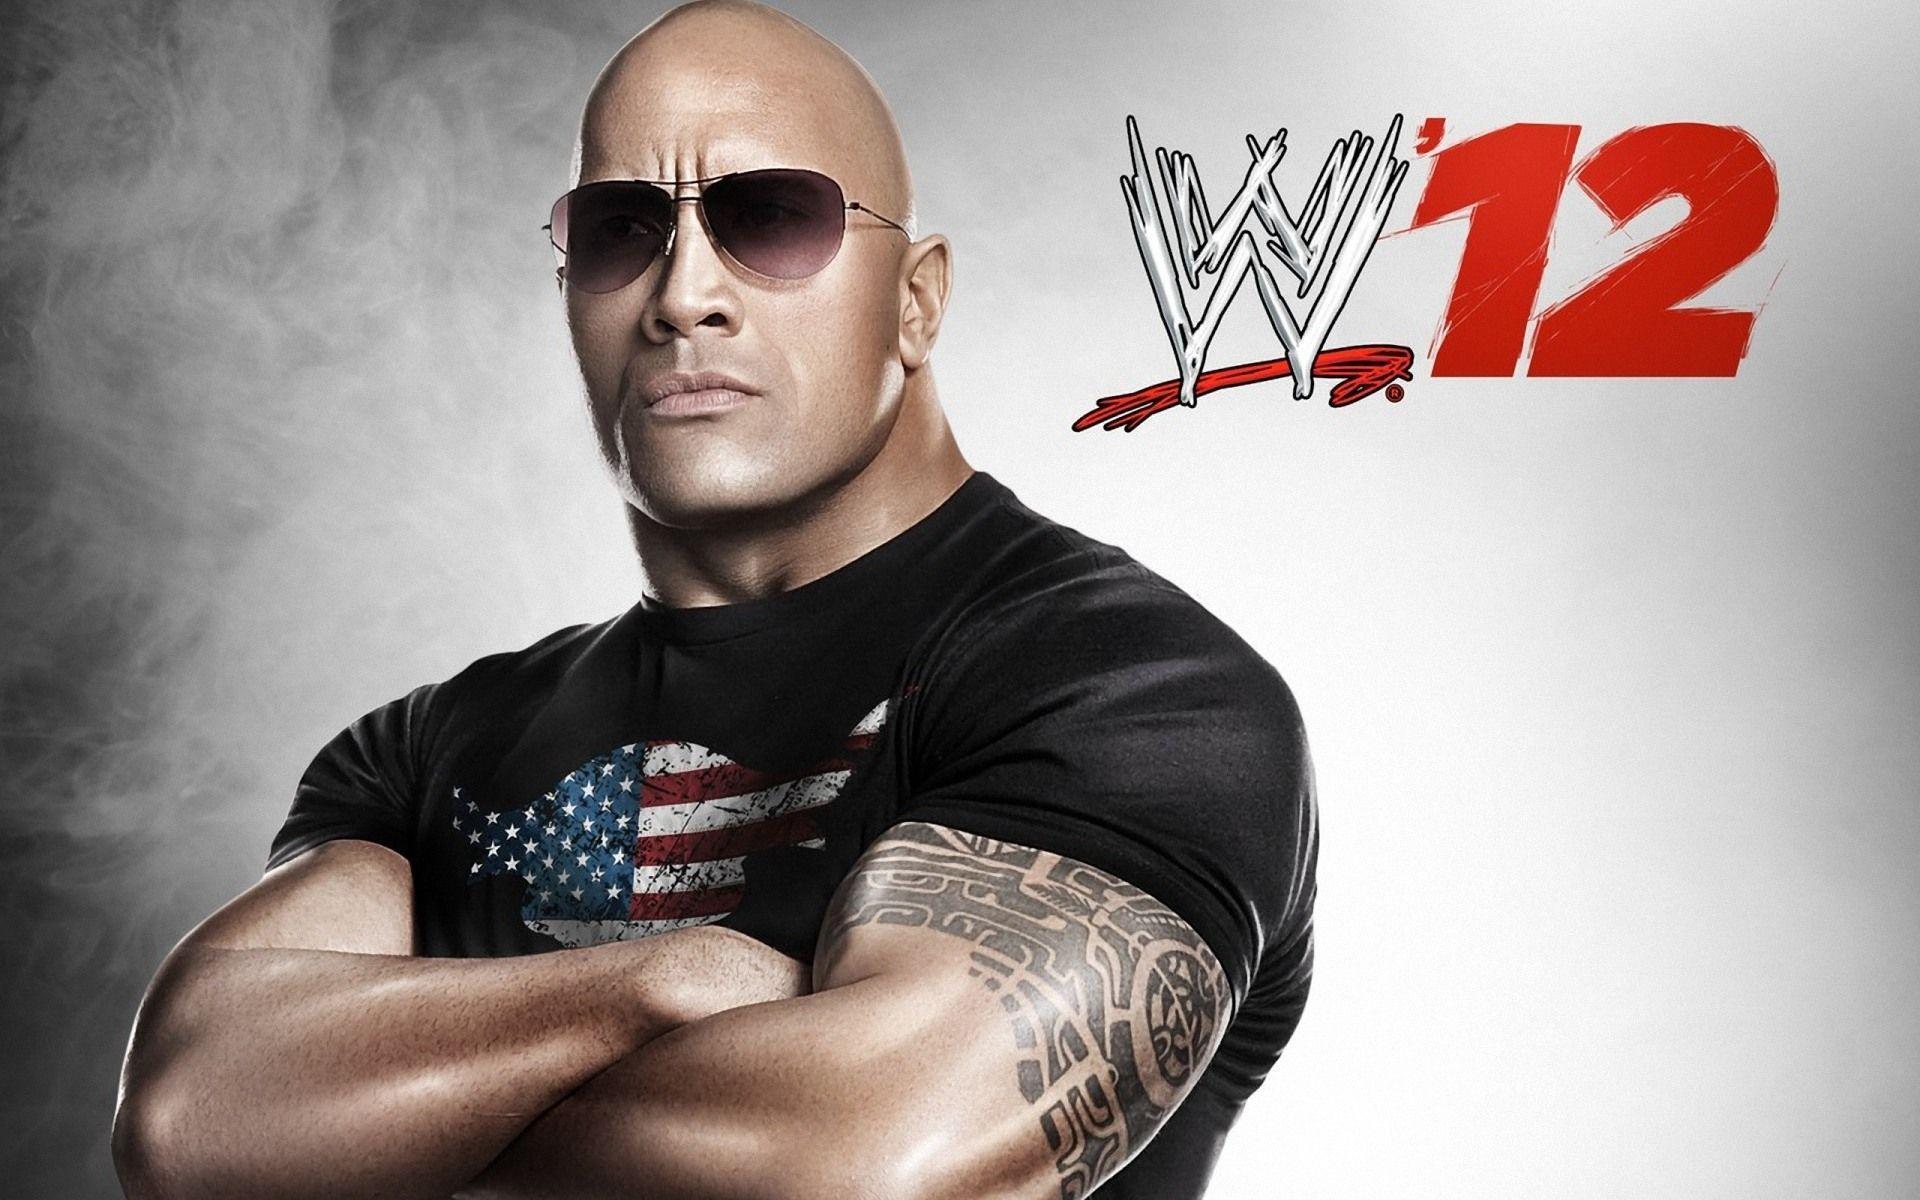 Dwayne Johnson Wallpaper High Resolution and Quality Download